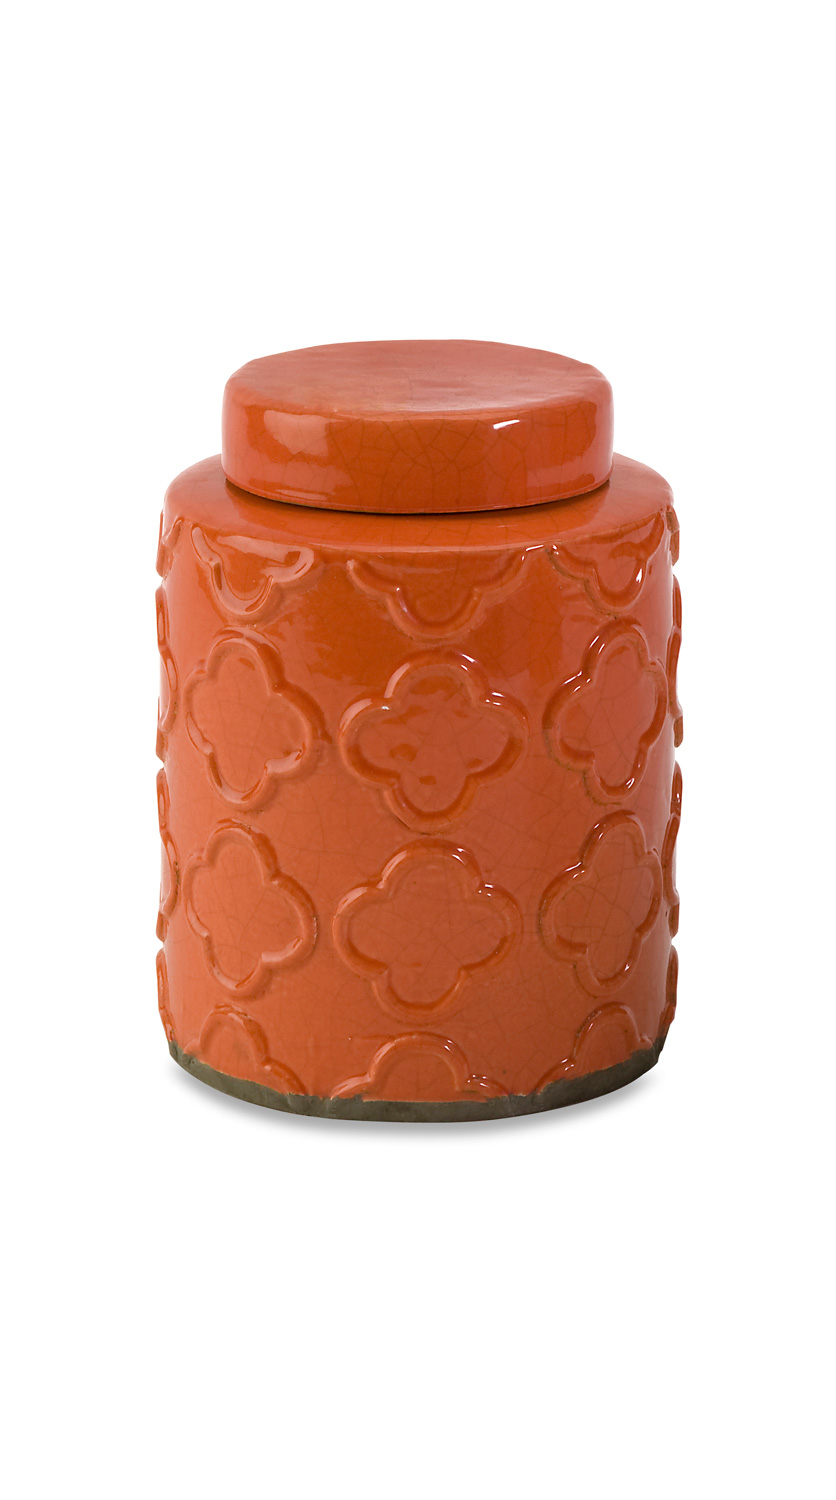 IMAX Essentials Small Orange Canister with Lid